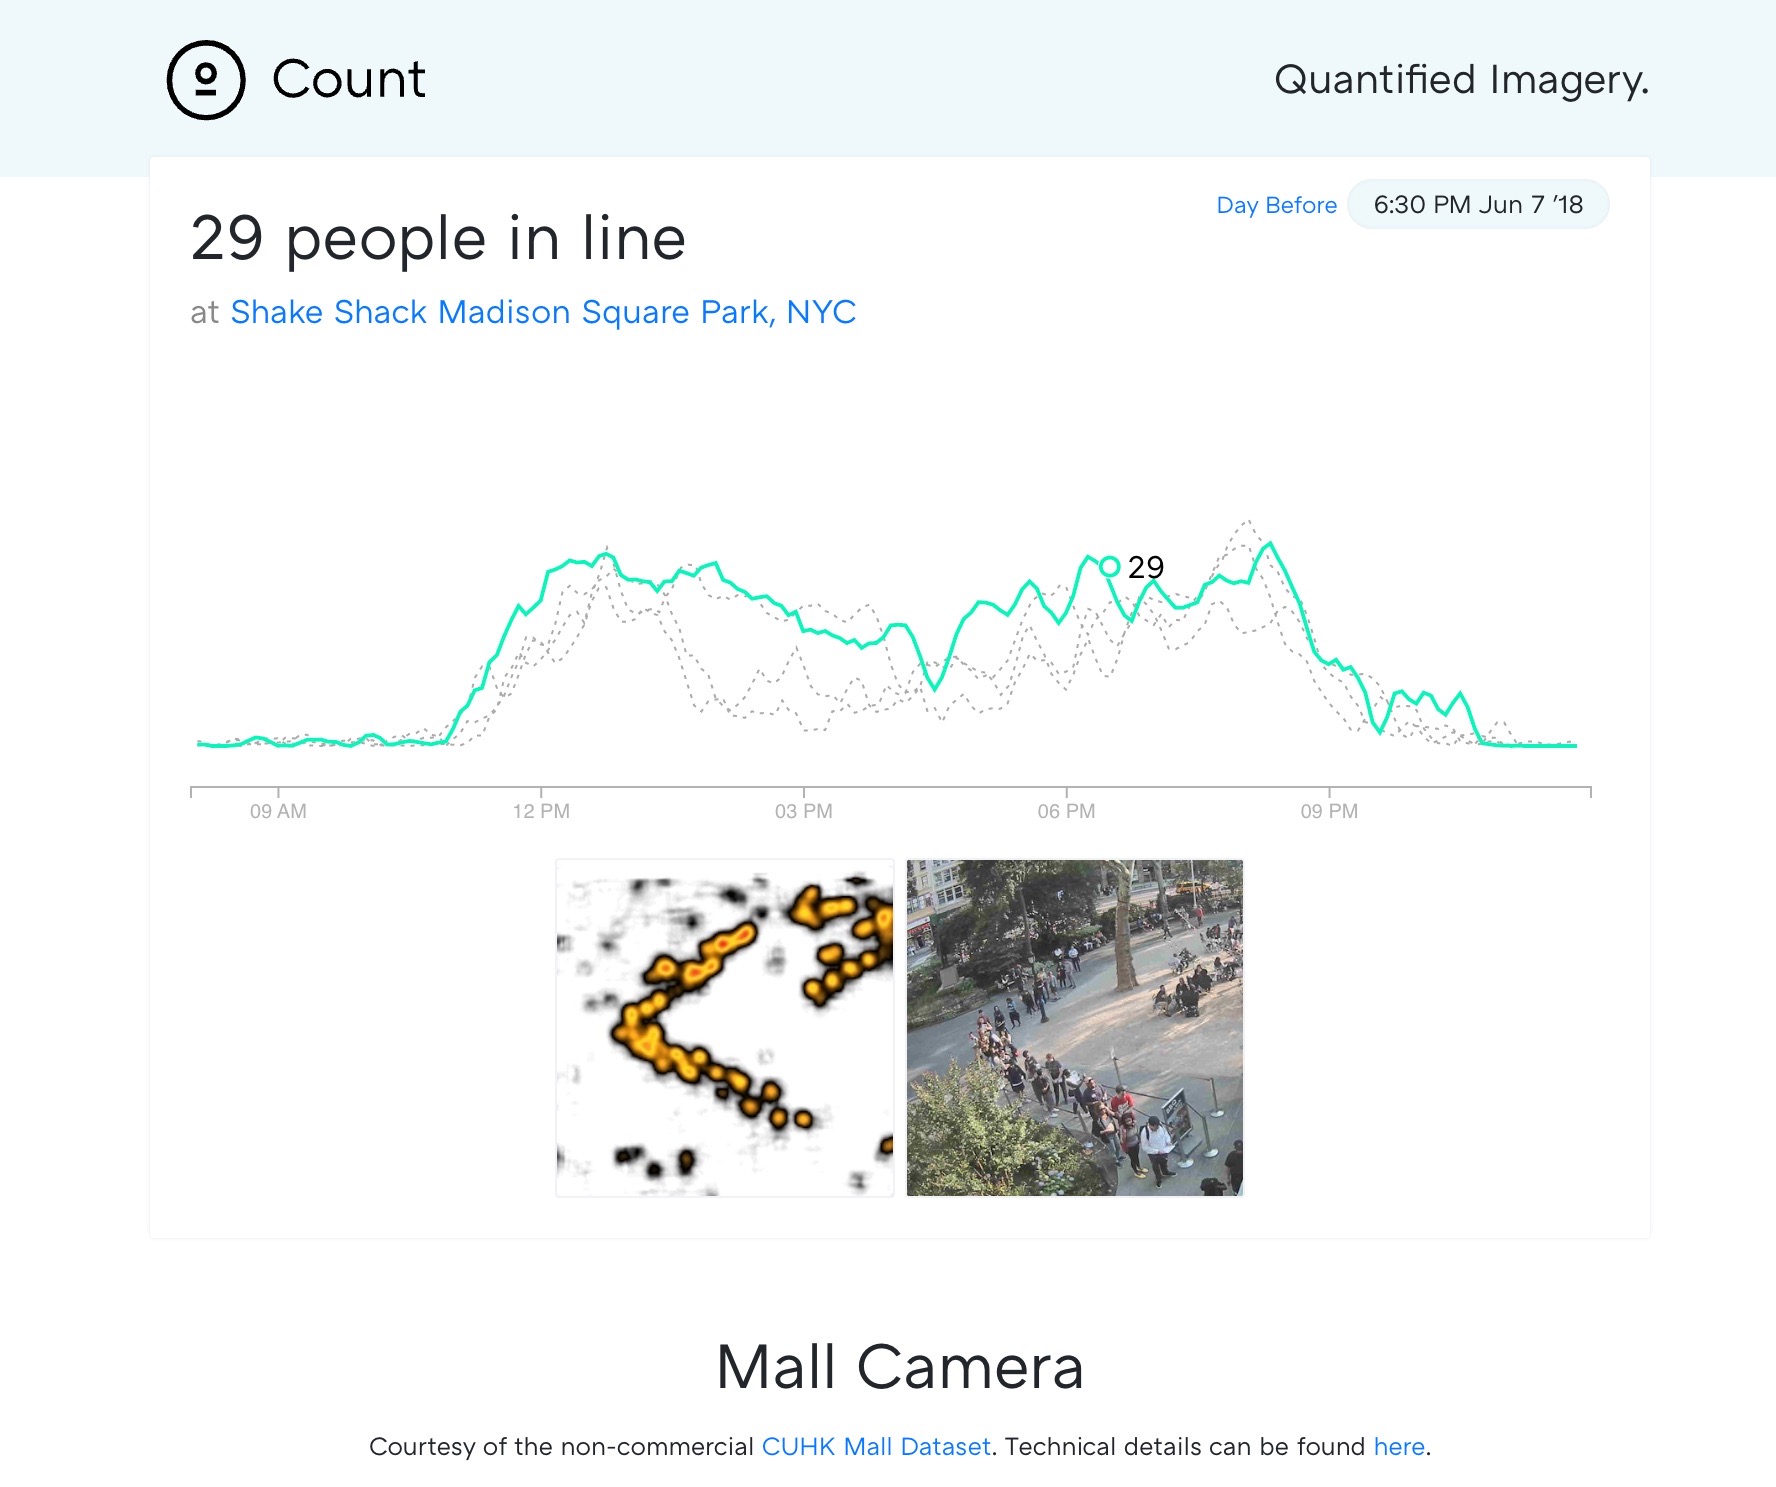 Count: Quantified Imagery